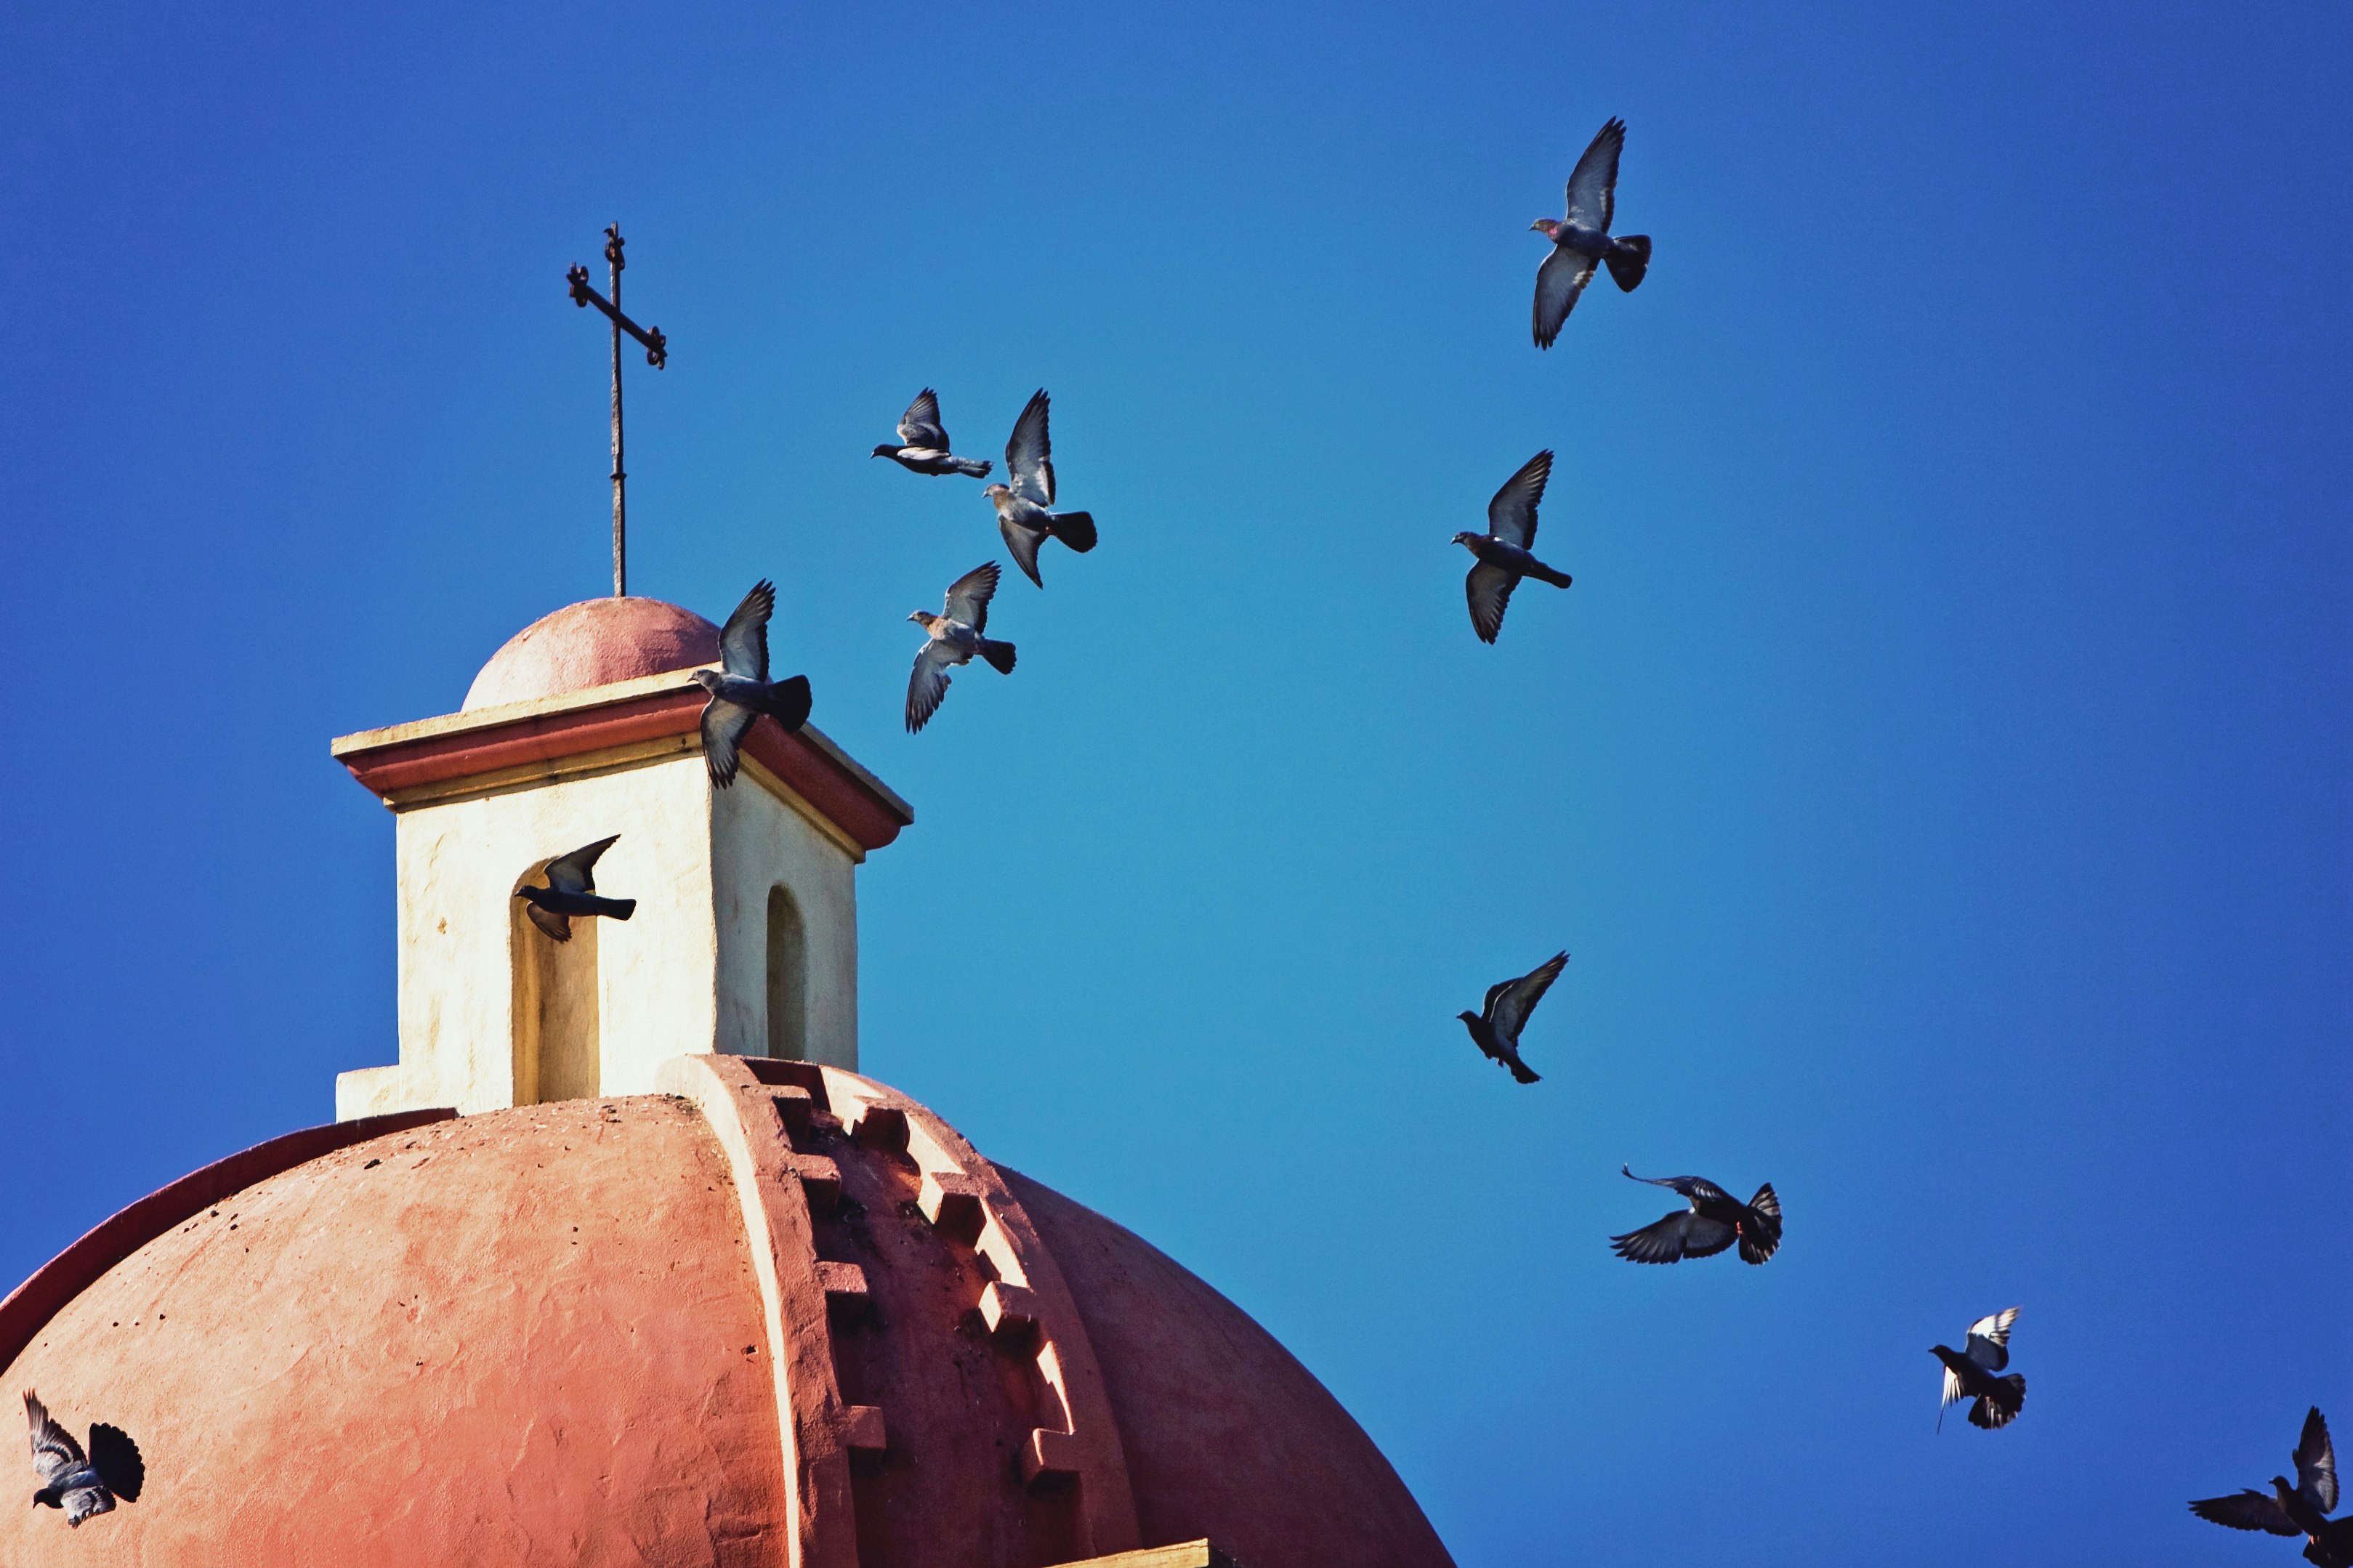 Birds fly past the terra cotta roof of a spanish-style mission in Santa Barbara; California ice cream